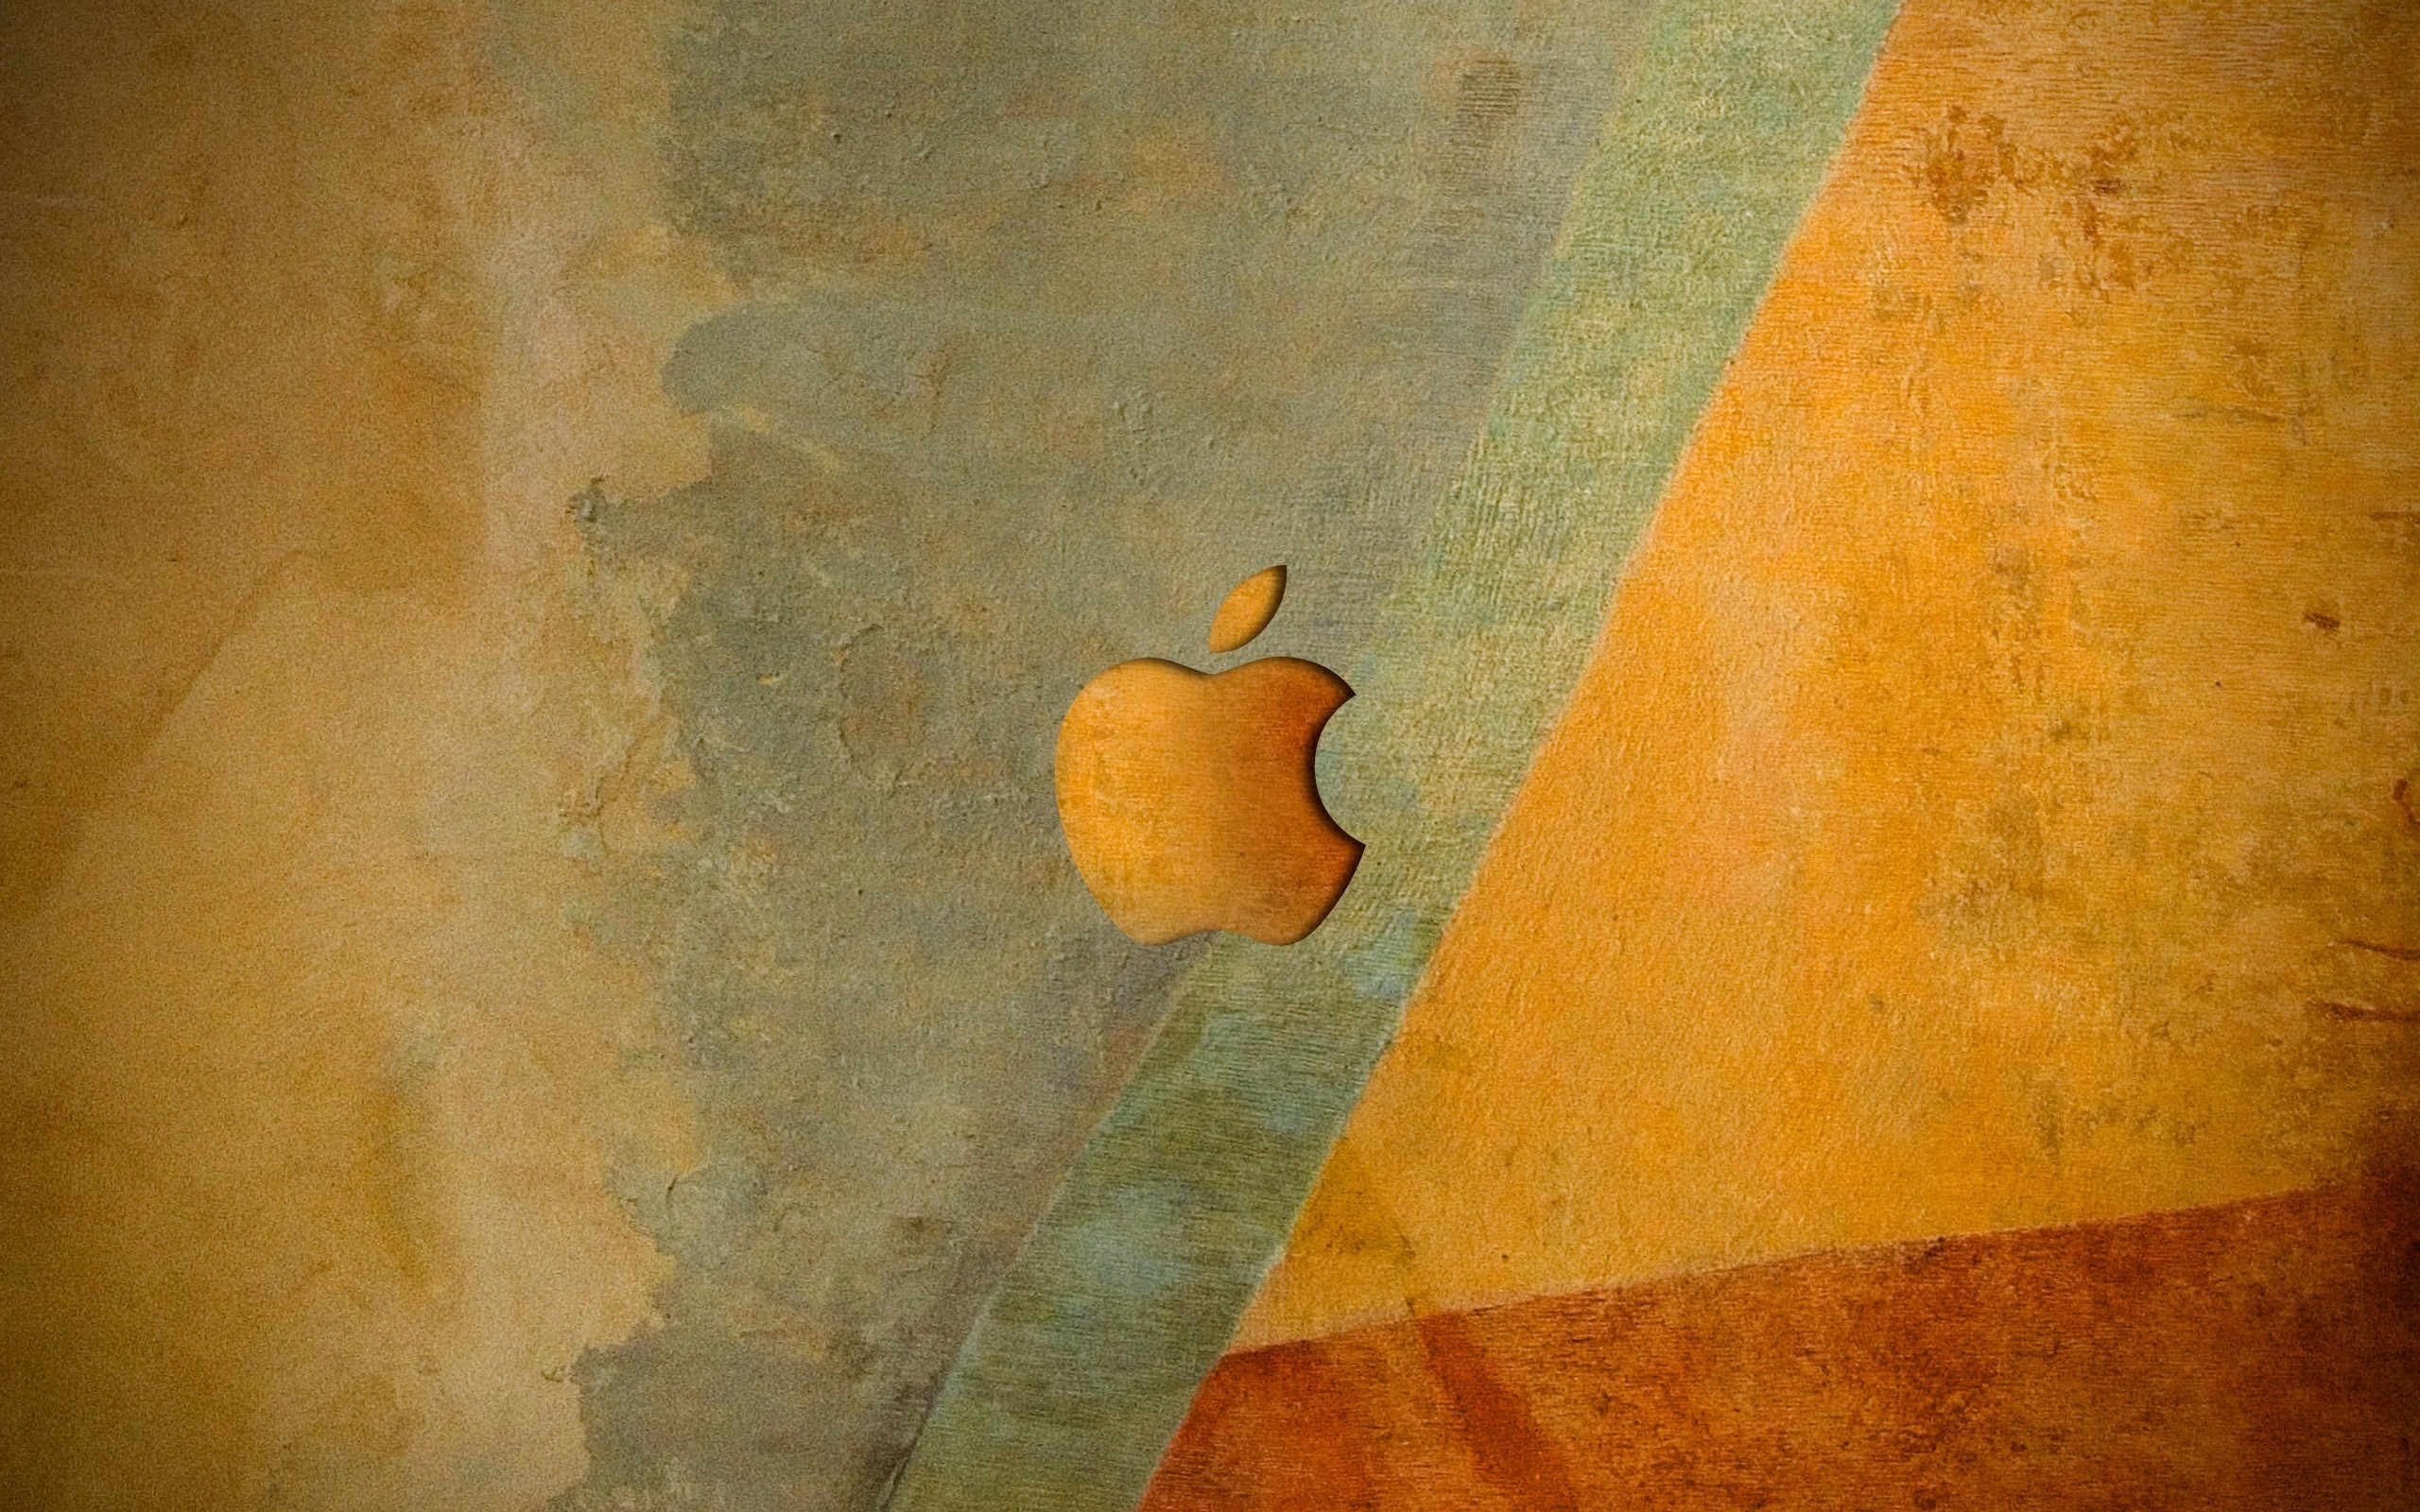 Different Apple Logo for 2560 x 1600 widescreen resolution